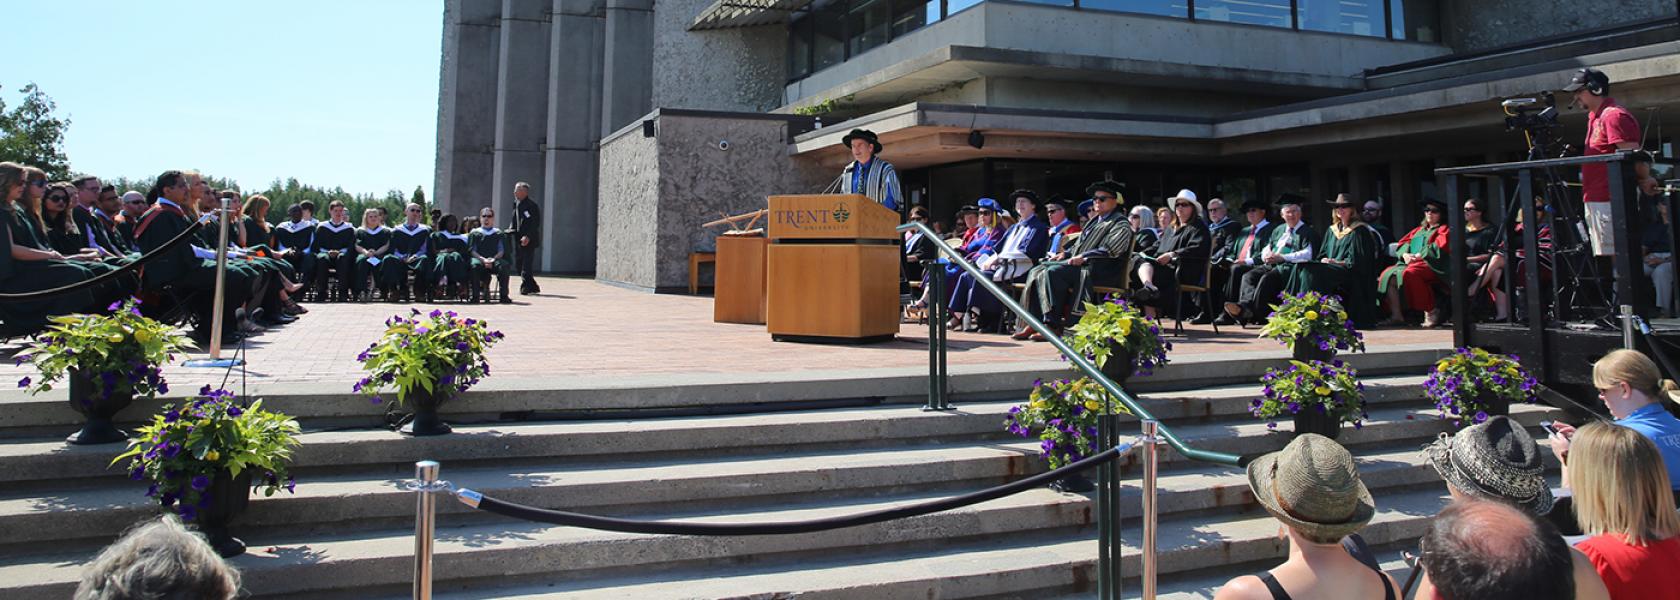 Dr. Leo Groarke standing talking into a podium microphone during convocation outisde of the Bata library